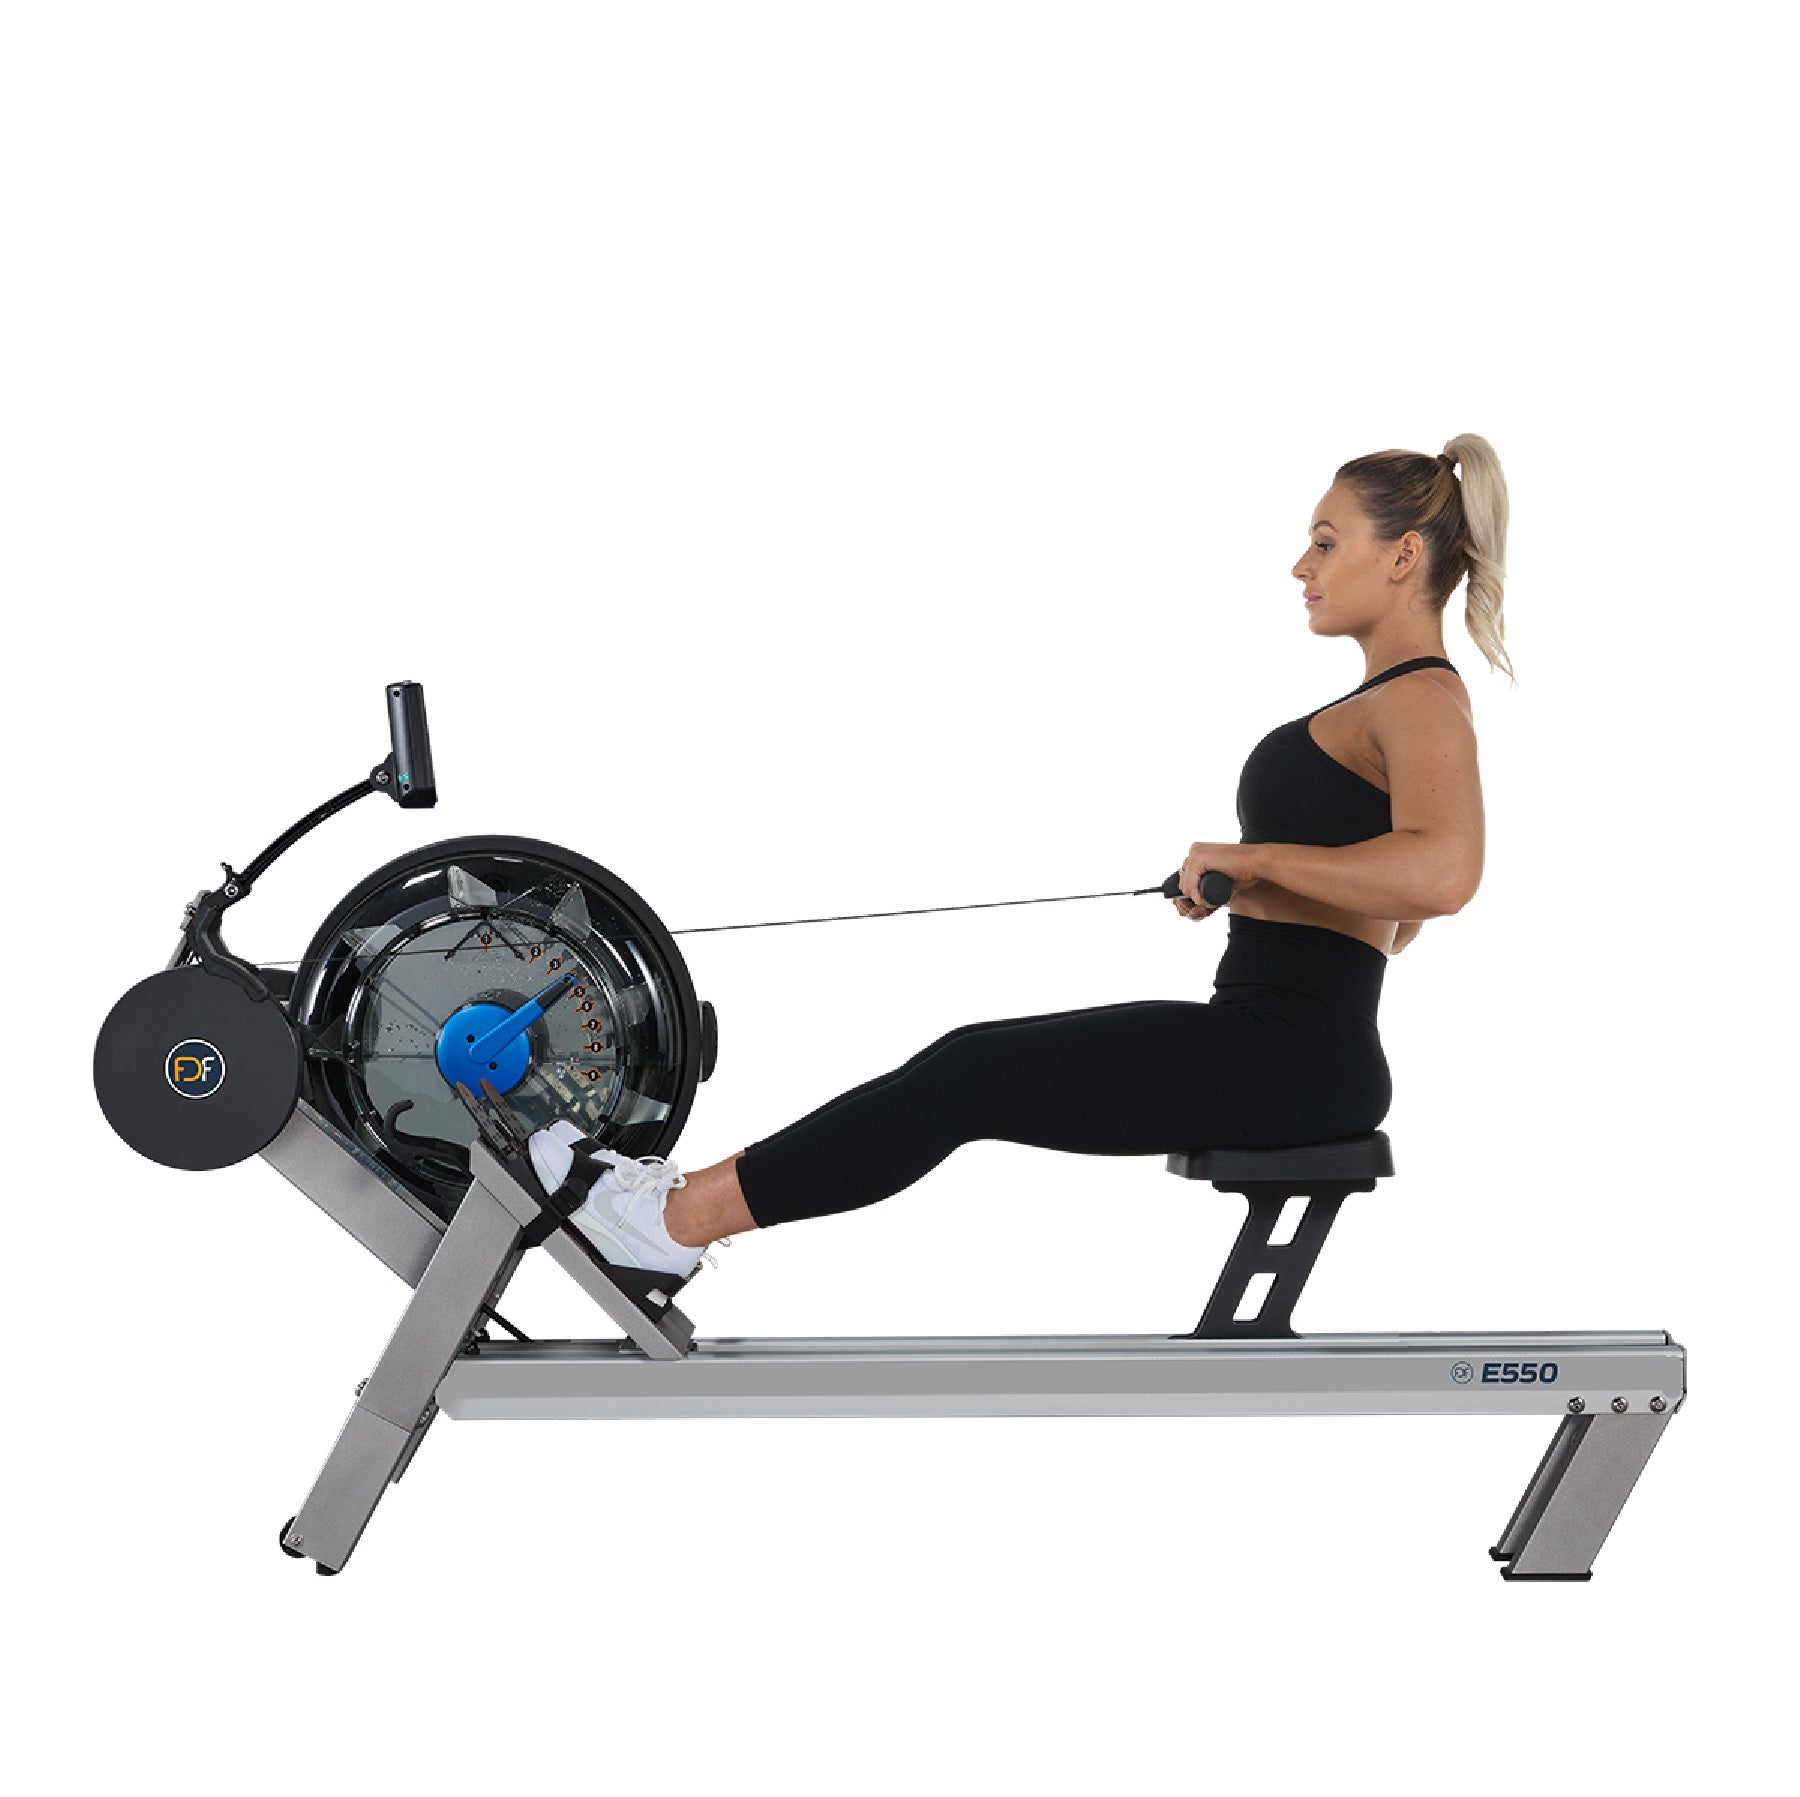 Indoor Fluid Rowing Machine with Computer Display - E550 Silver Rails - 10 levels of resistance